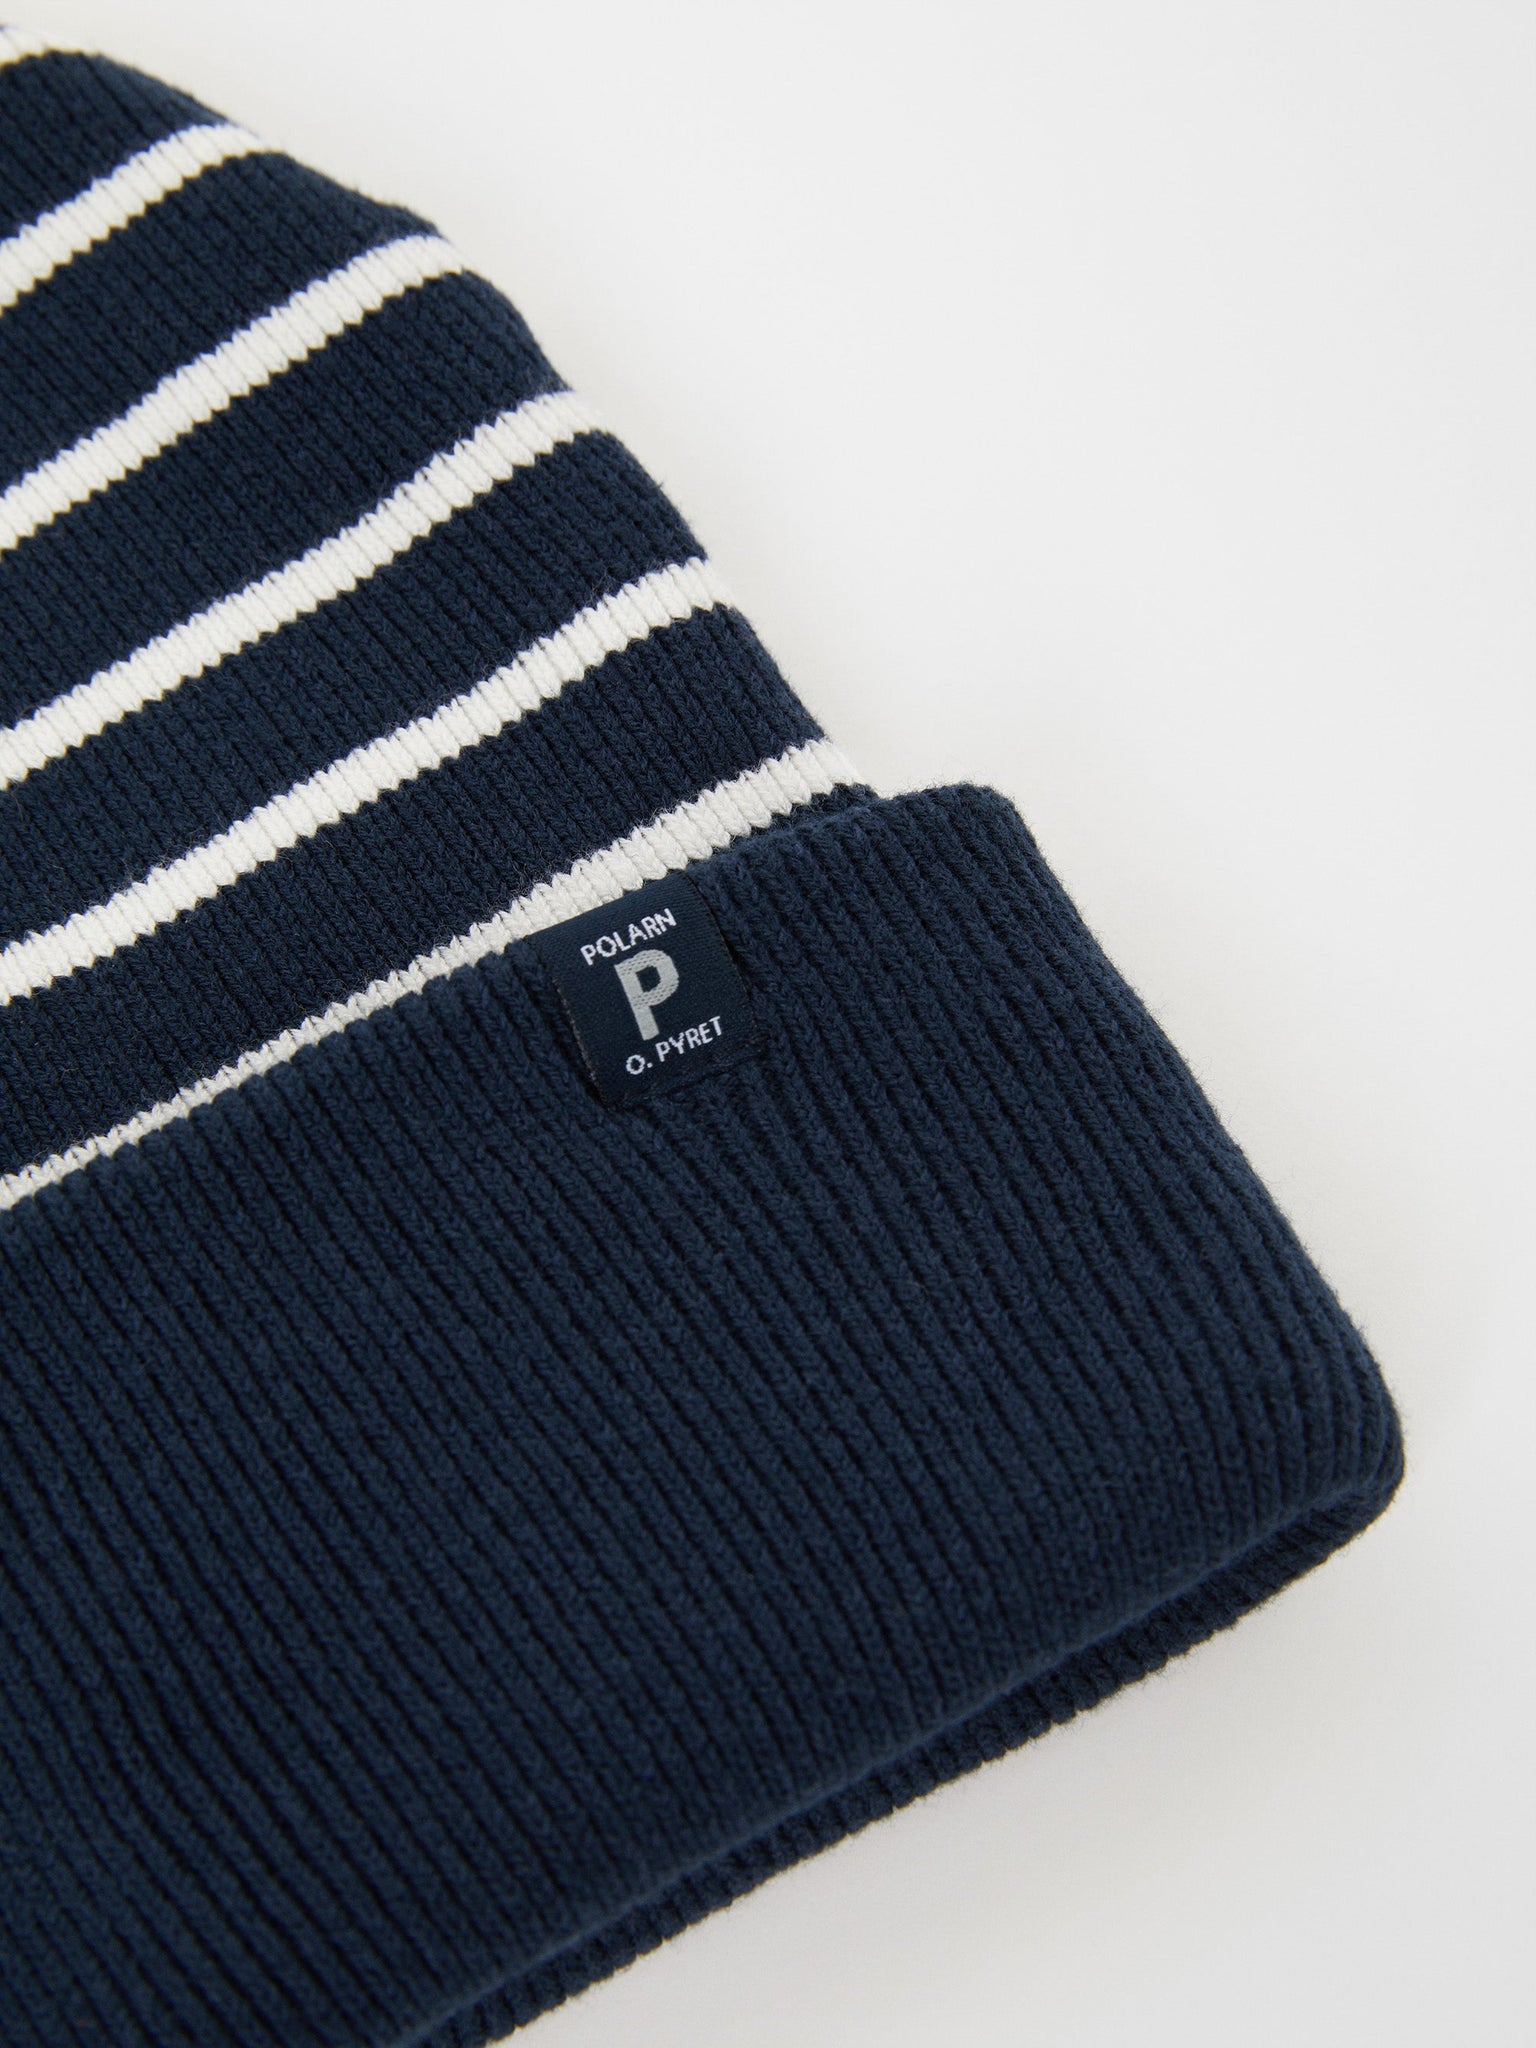 Ribbed Navy Kids Beanie Hat from the Polarn O. Pyret outerwear collection. Made using ethically sourced materials.